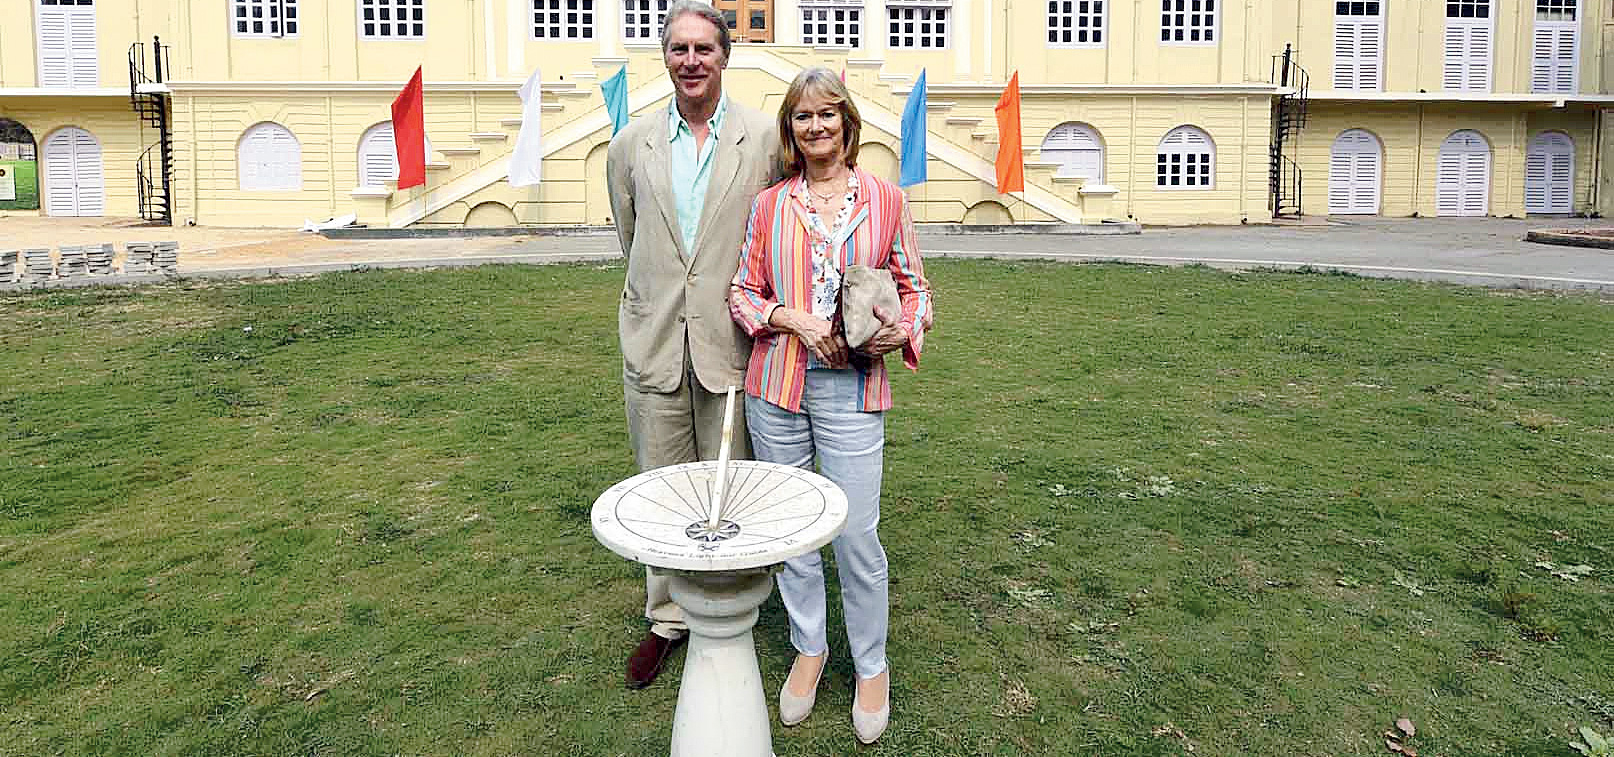 Gilbert Timothy George Lariston Elliot-Murray-Kynynmound, the seventh Earl of Minto, with his wife Diana Barbara Trafford  in front of the Old Government House in Barrackpore on Saturday. 